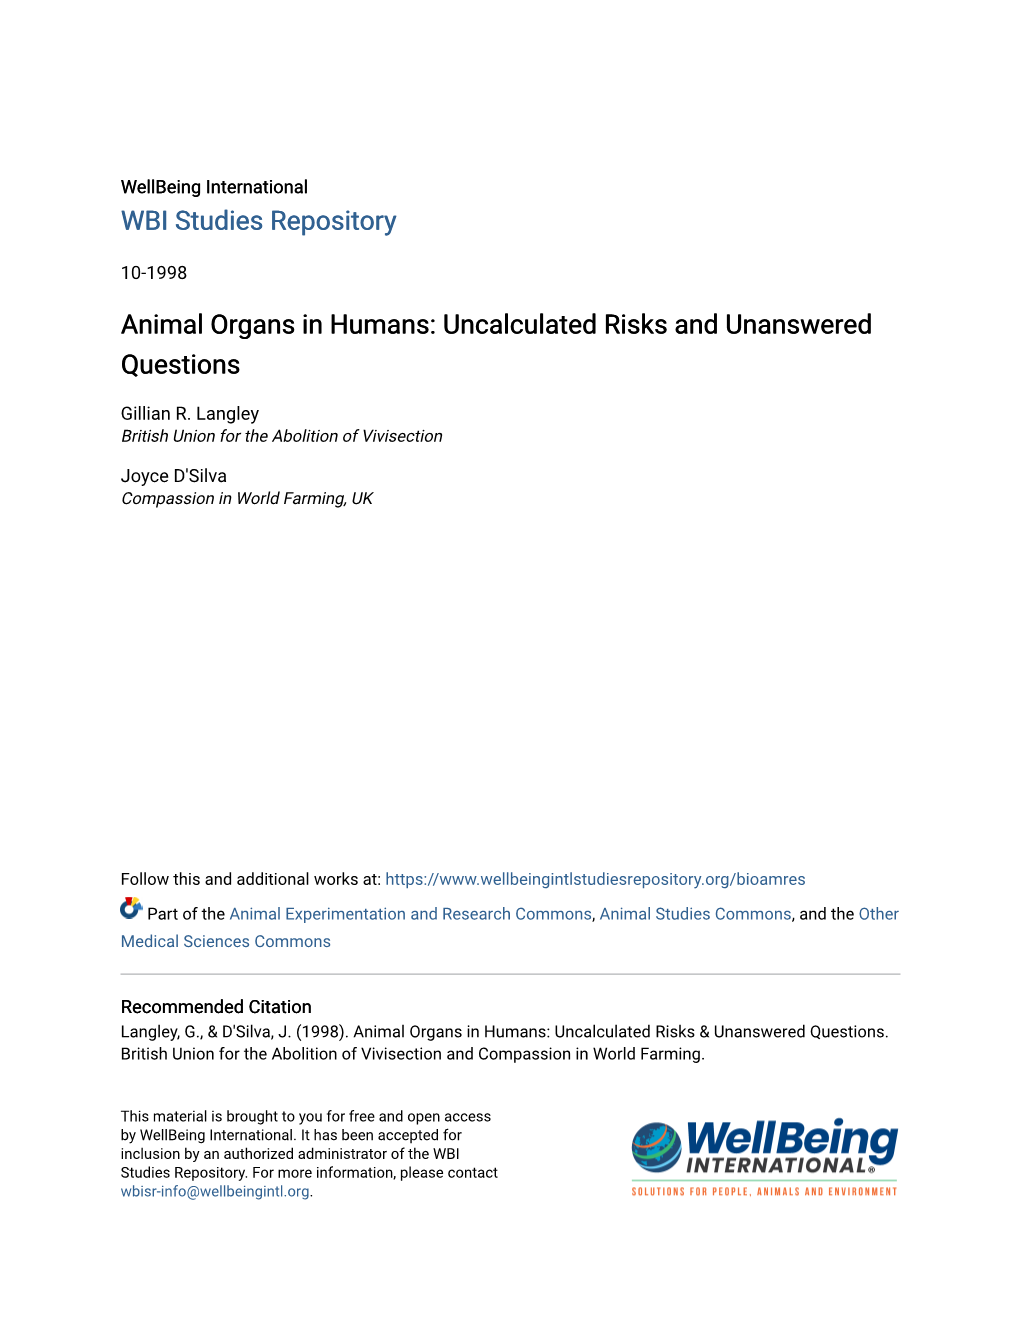 Animal Organs in Humans: Uncalculated Risks and Unanswered Questions